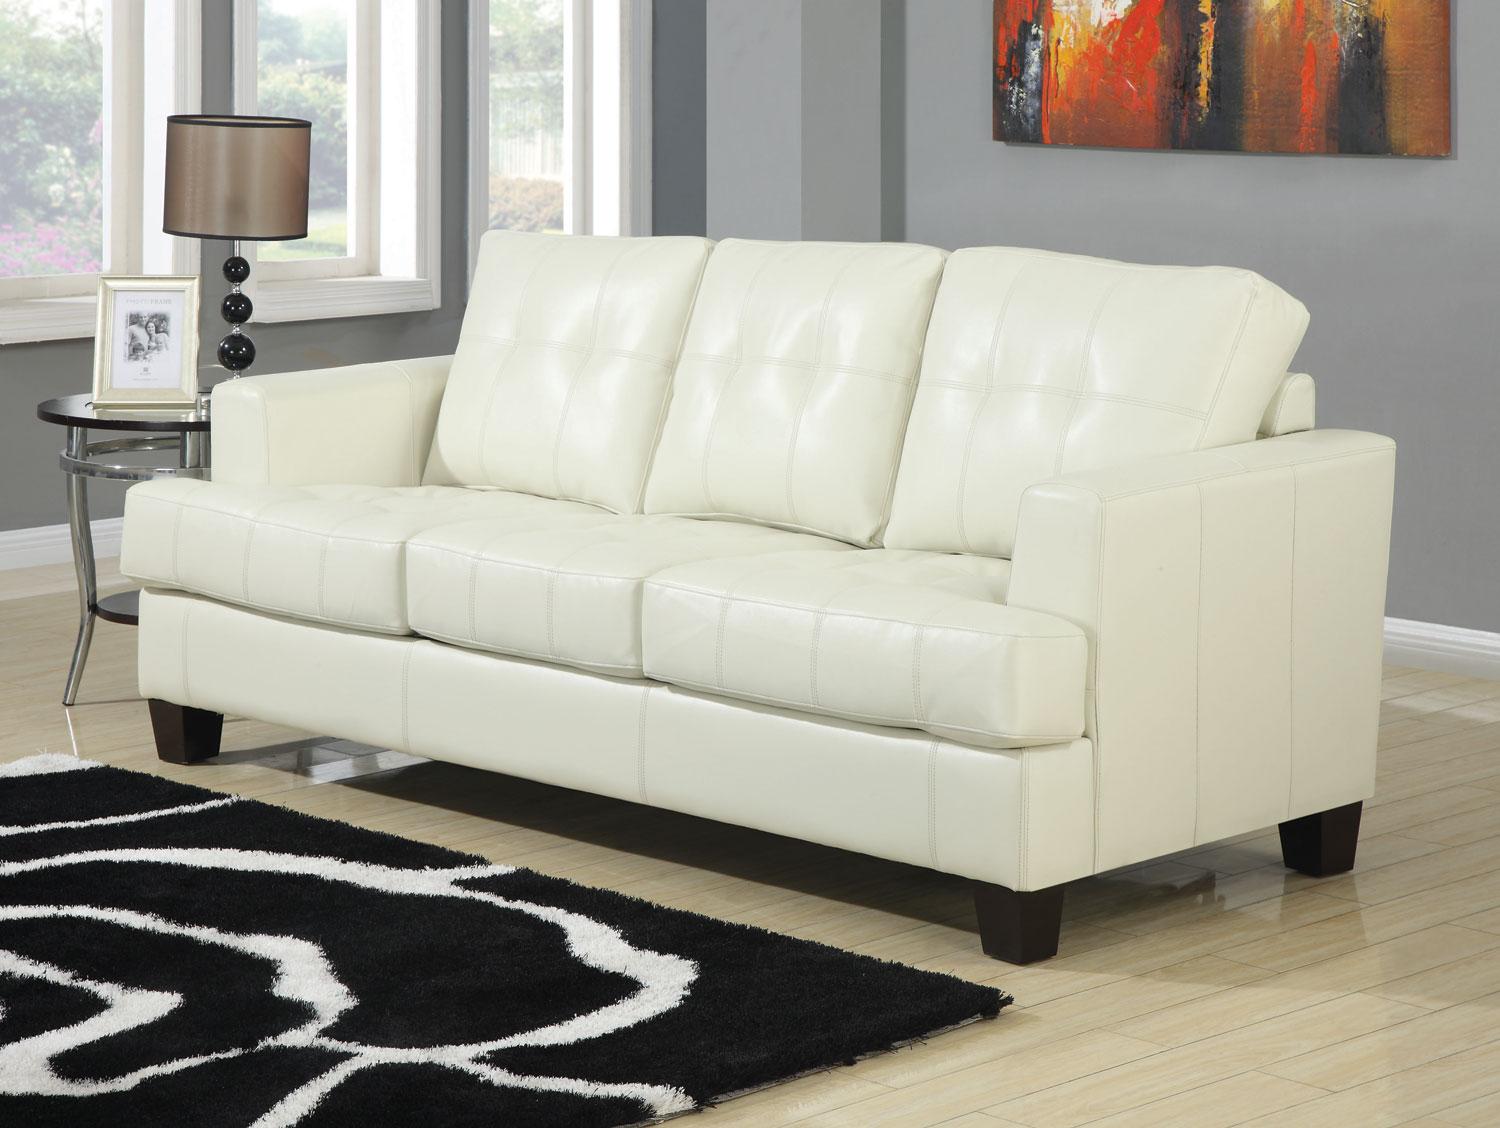 Modern Living With Interesting Modern Living Room Design With Toronto Cream Colored Leather Sleeper Sofa And Black Colored Rug Carpet On The Floor Decoration Creative Leather Sleeper Sofa With Various And Bewitching Interiors